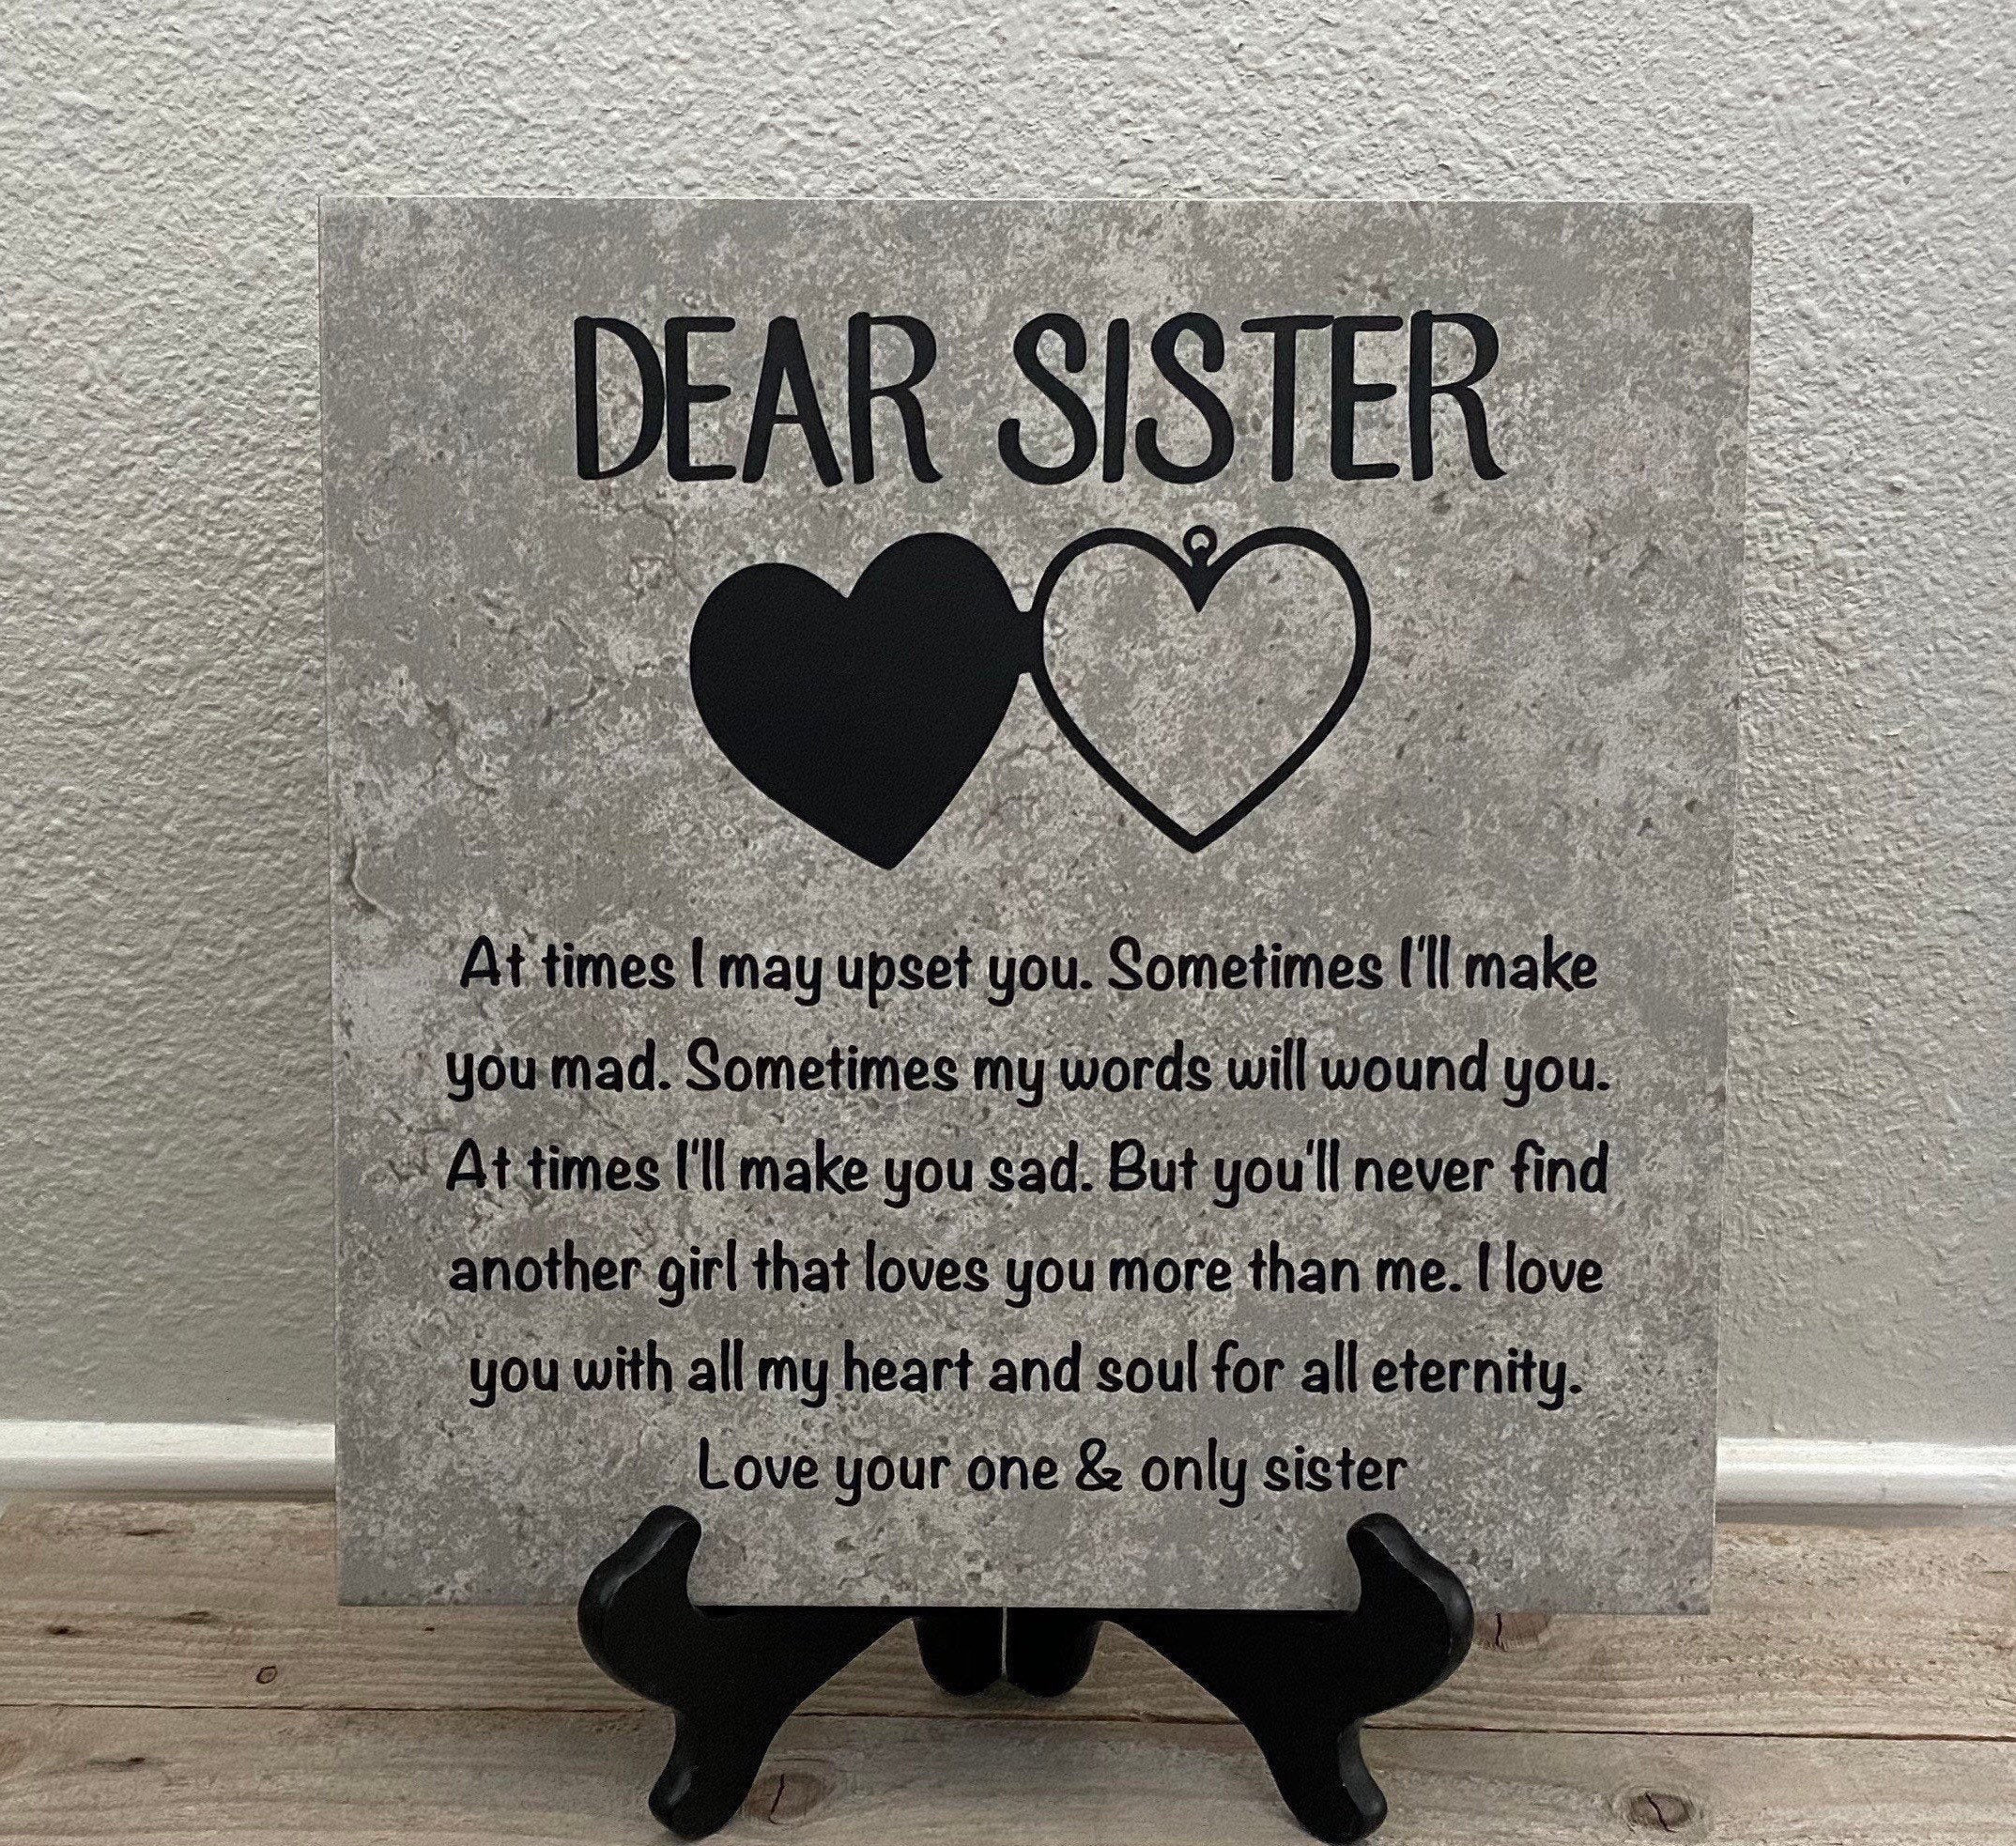 Gift for Sister, Birthday Day Gifts, Christmas Gifts, Personalized Gifts,  Gifts for Her, Housewarming Gift, Sister Gifts,decorative Tile, 